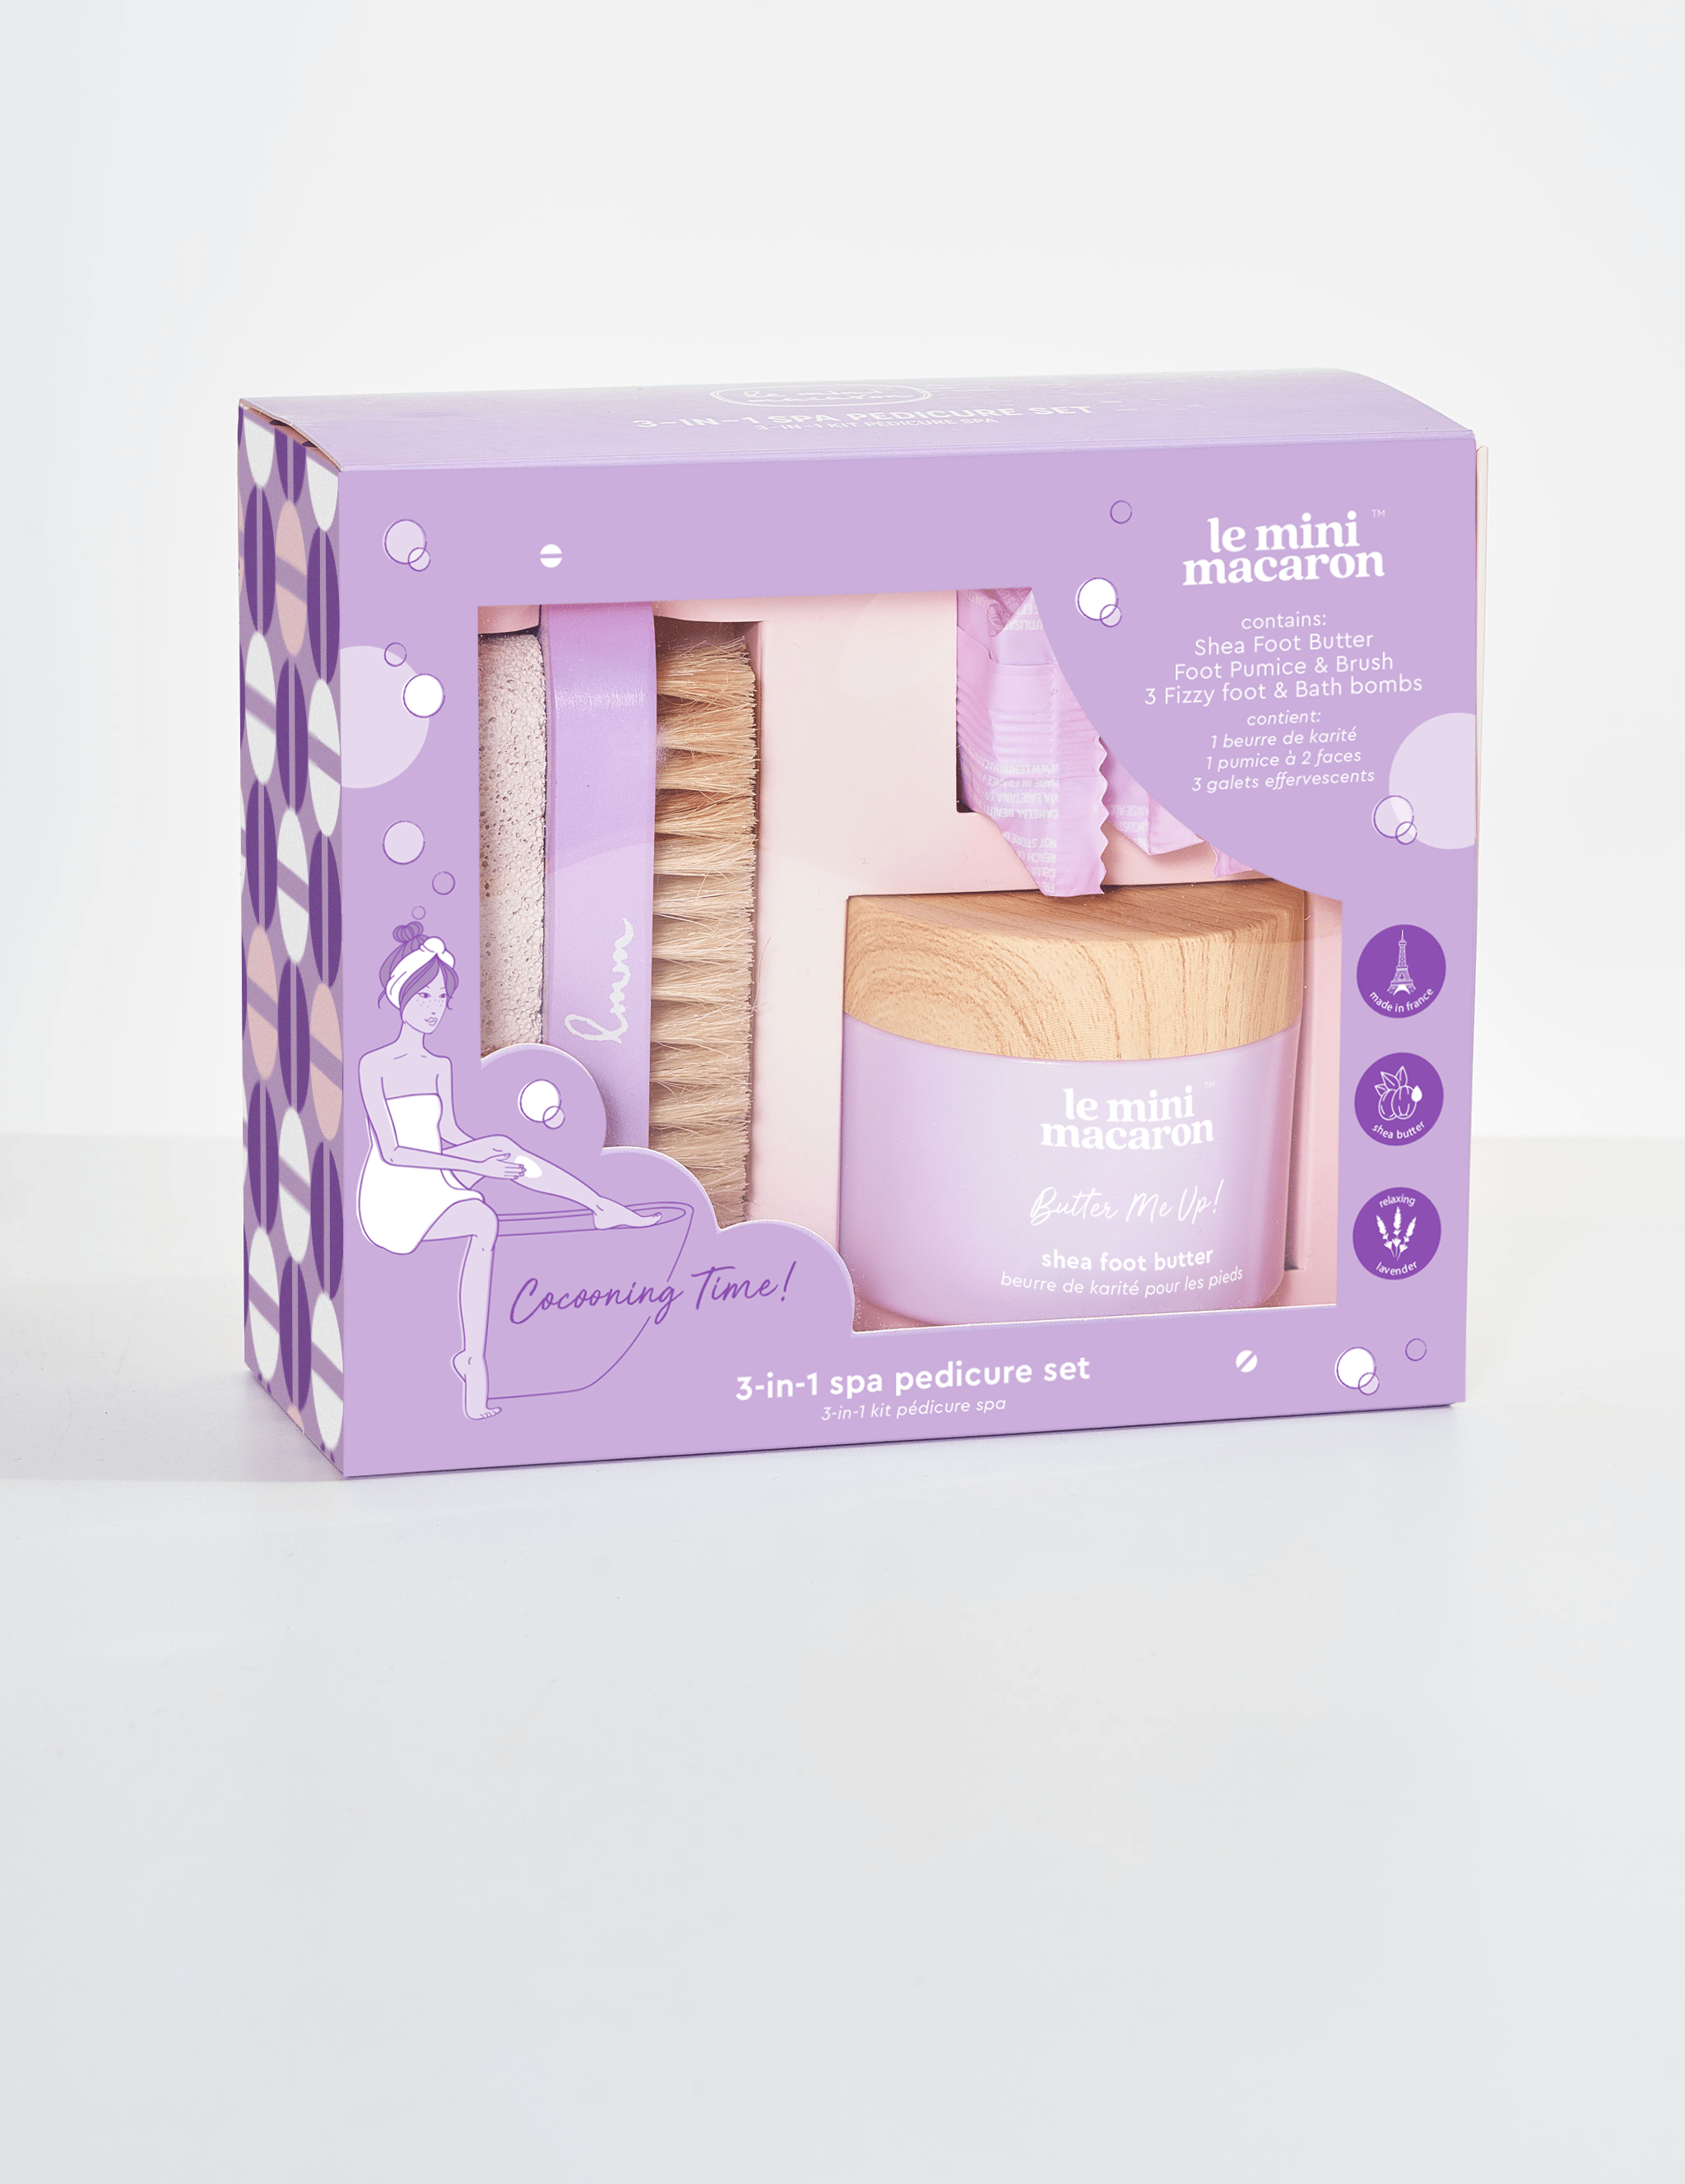 Cocooning Time 3-in-1 Spa Pedicure Set - Le Mini Macaron